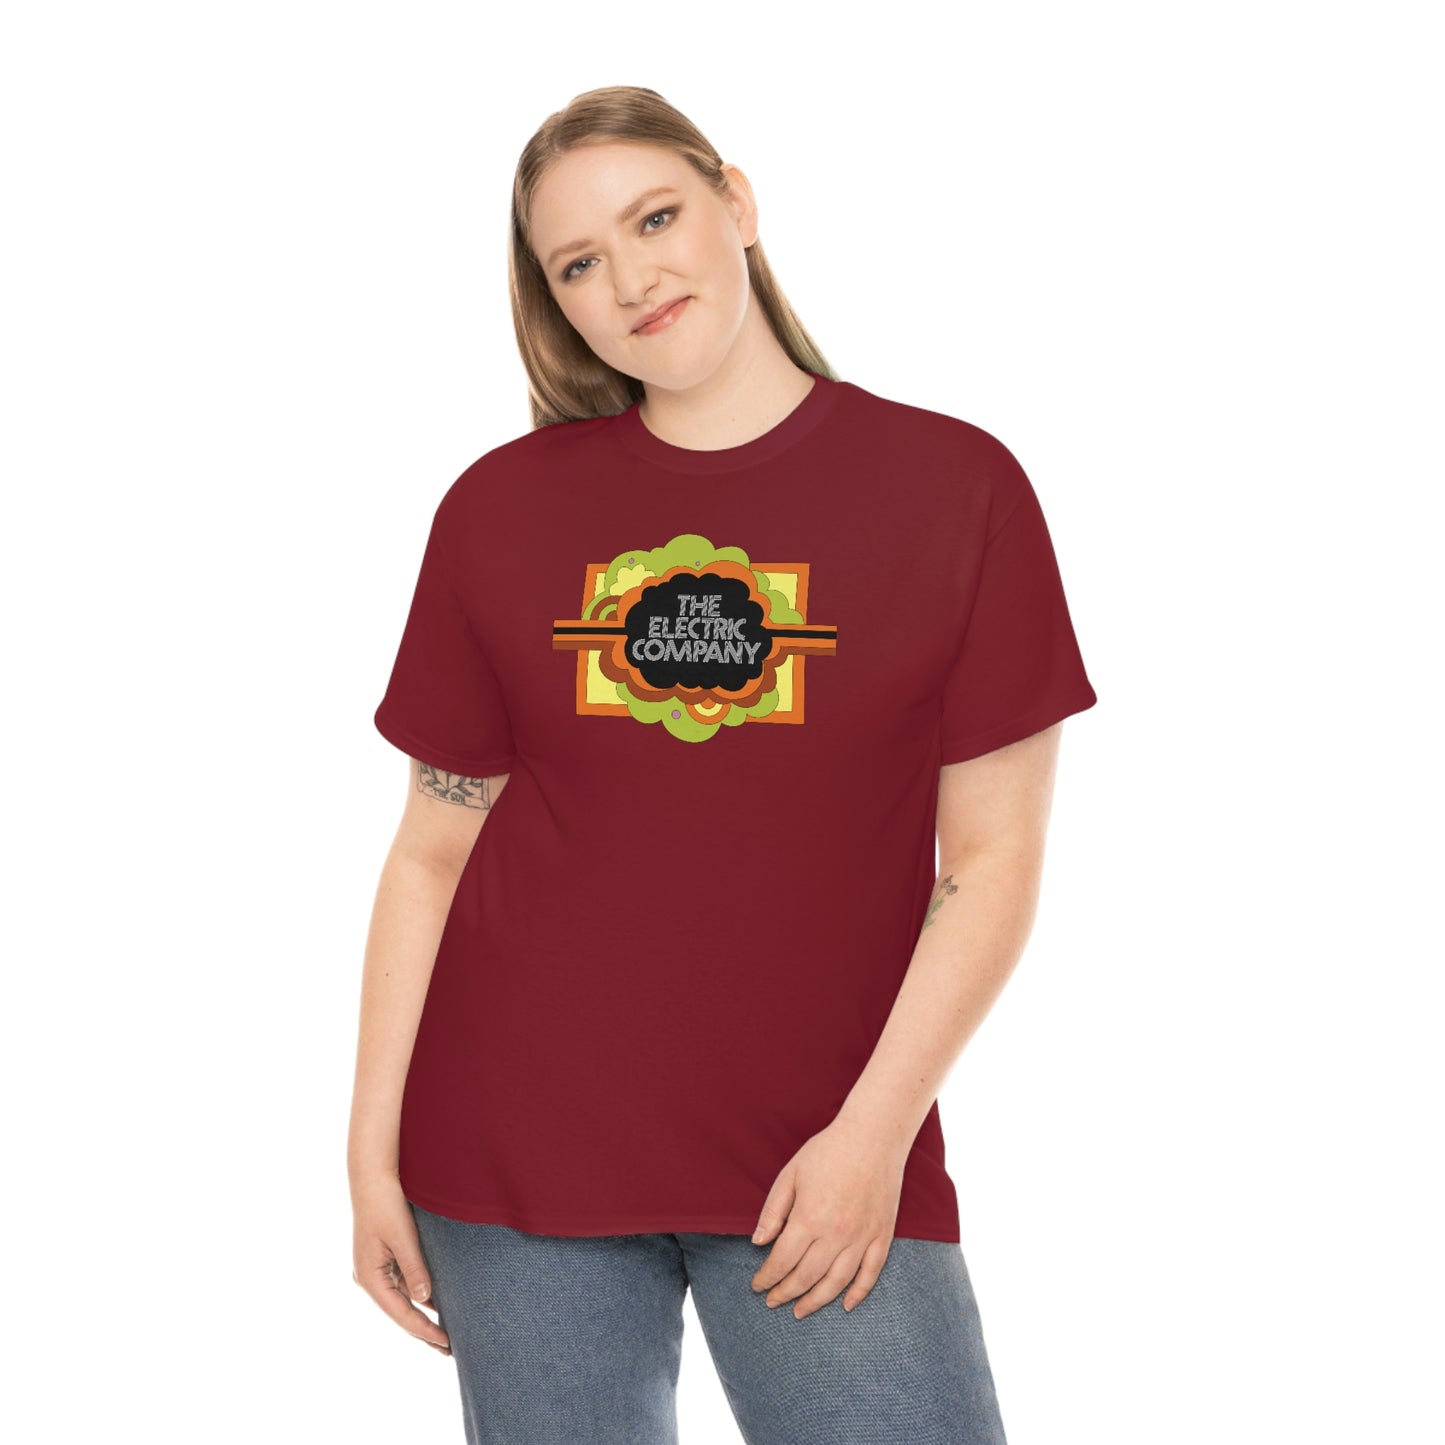 The Electric Company T-Shirt